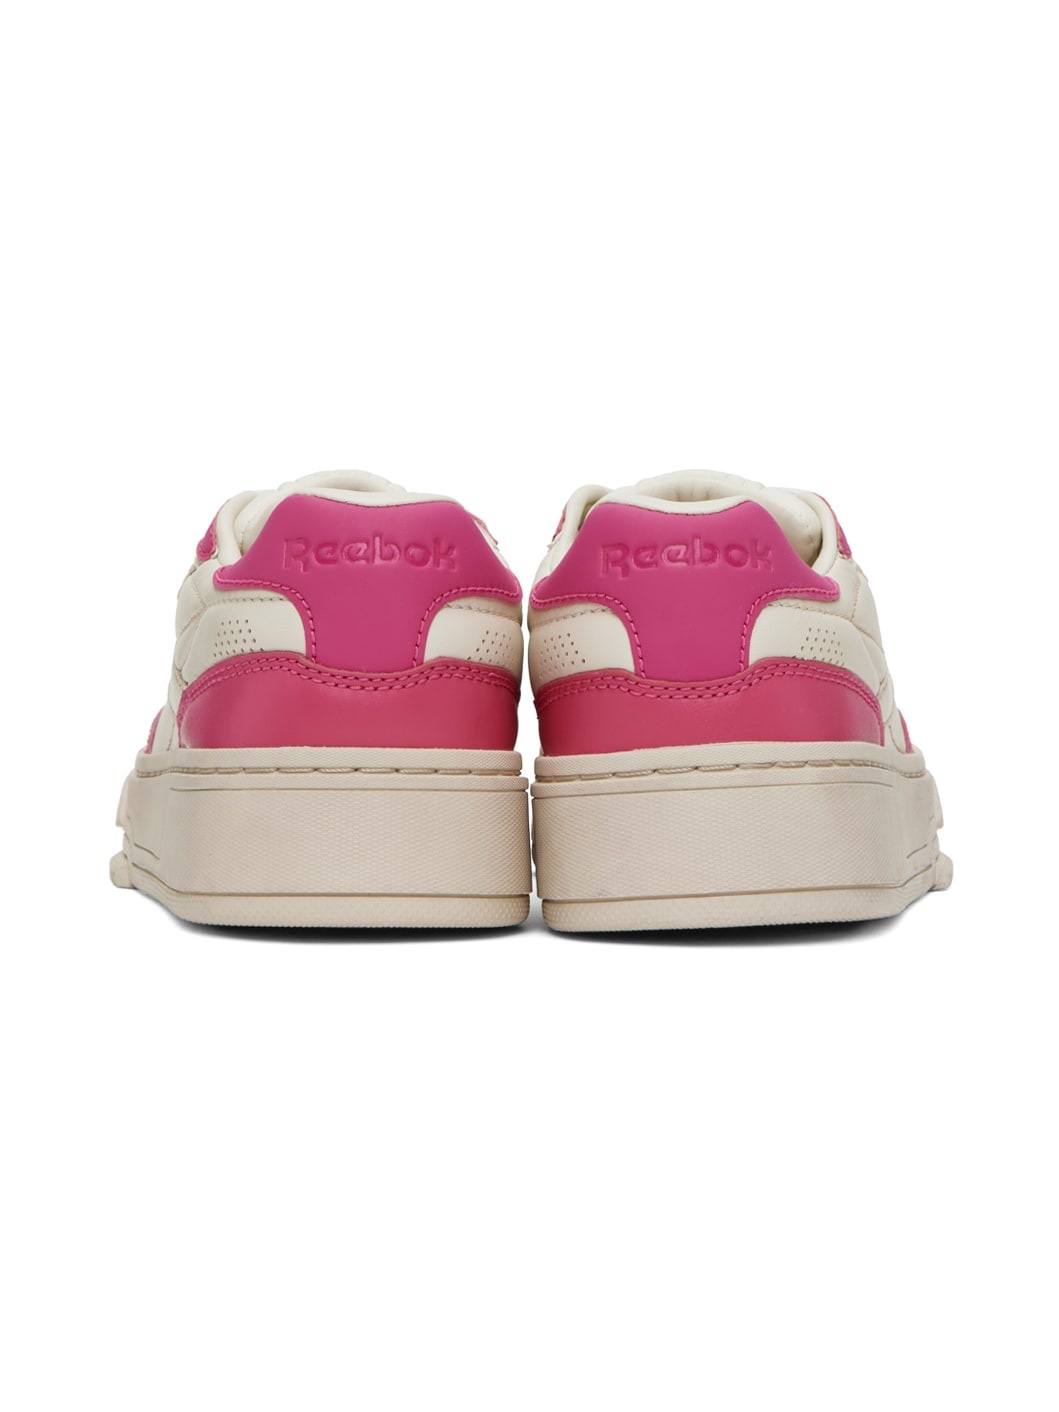 Off-White & Pink Club C LTD Sneakers - 2